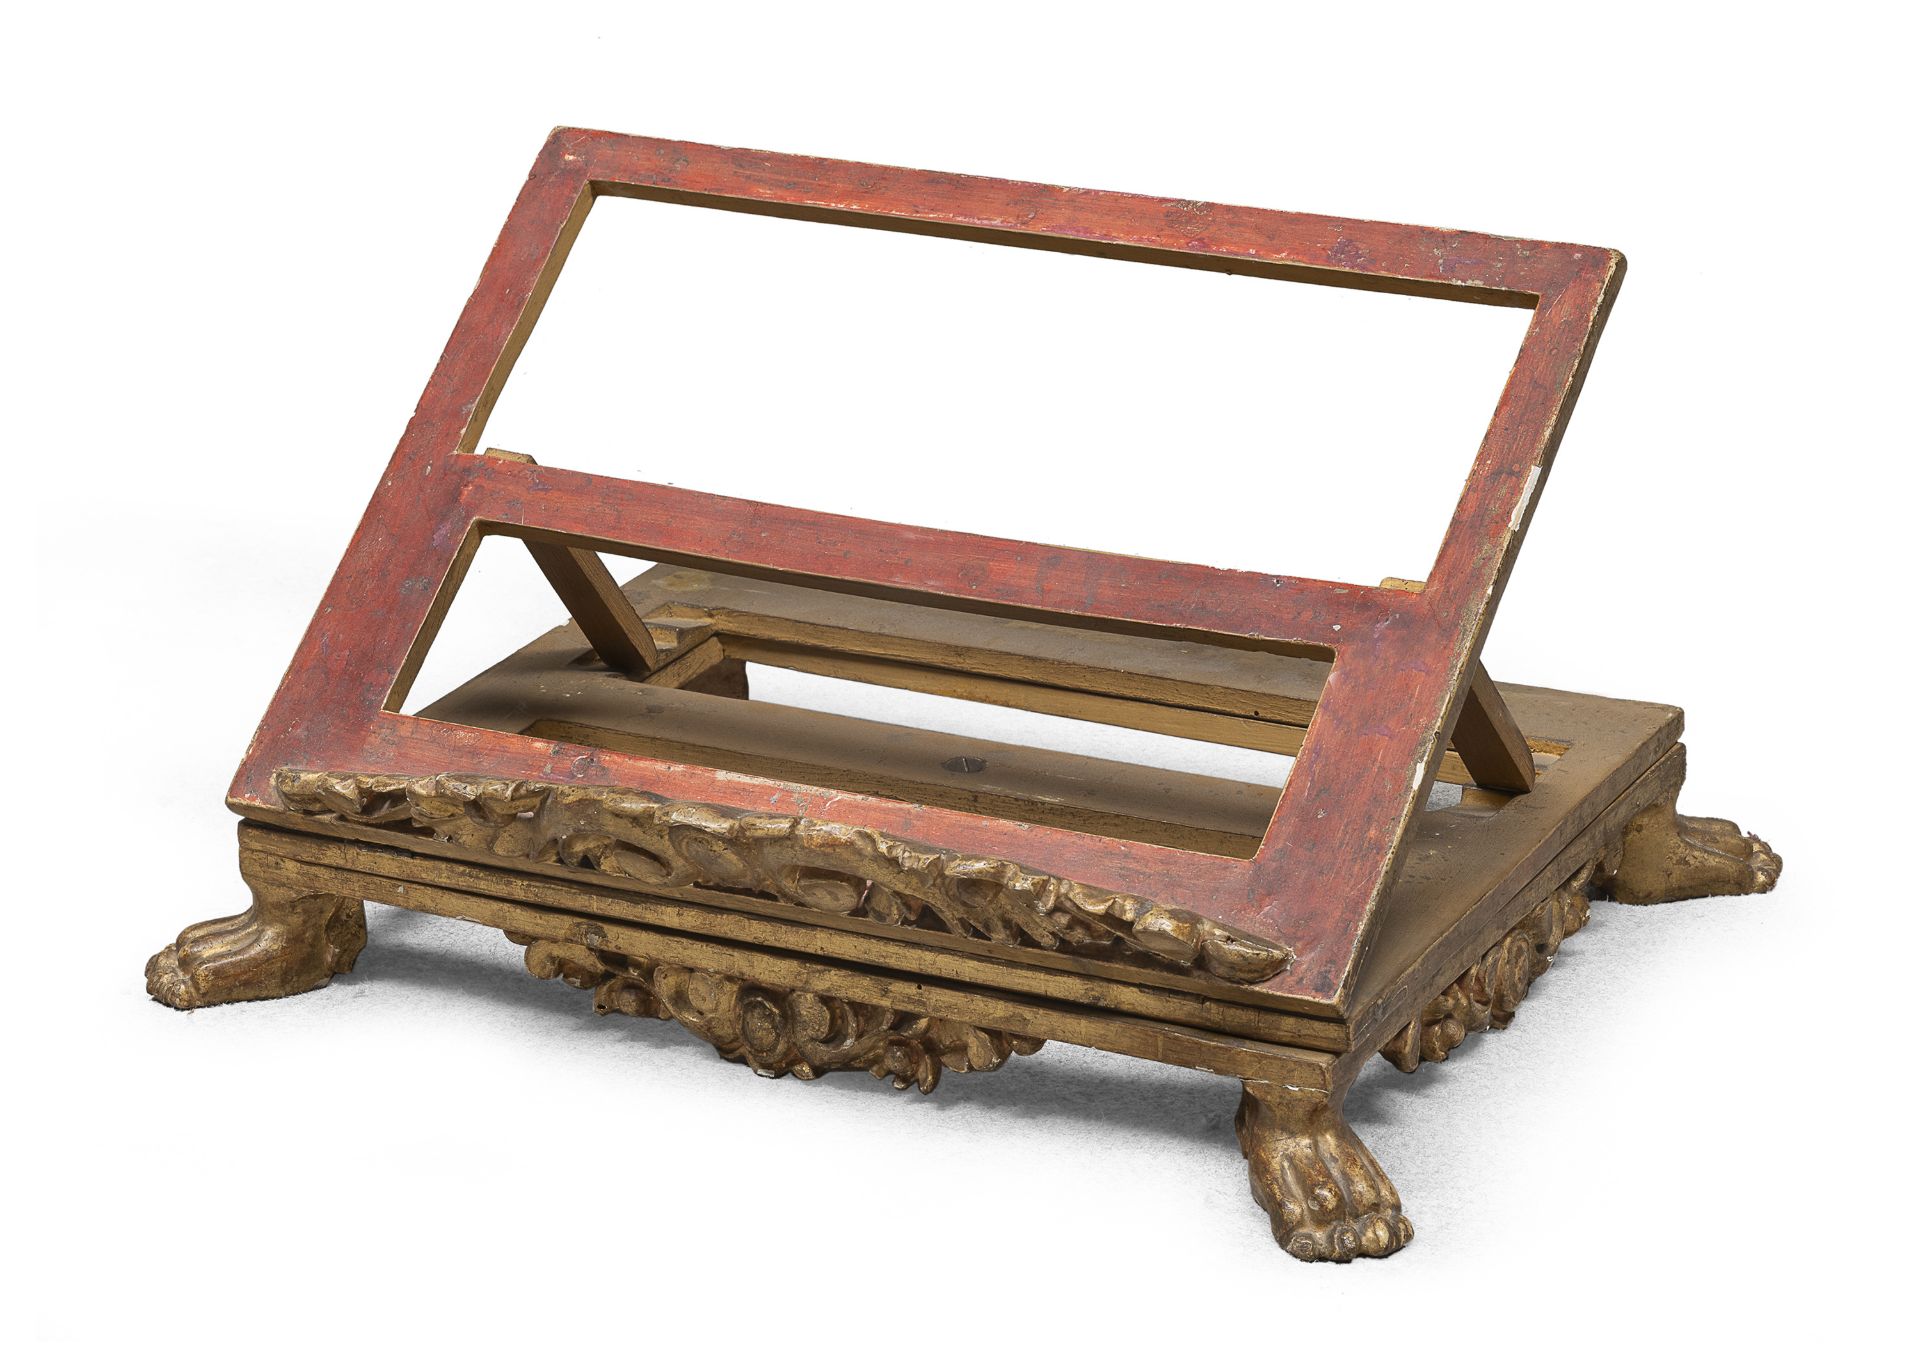 GILTWOOD BOOKREST EARLY 19TH CENTURY